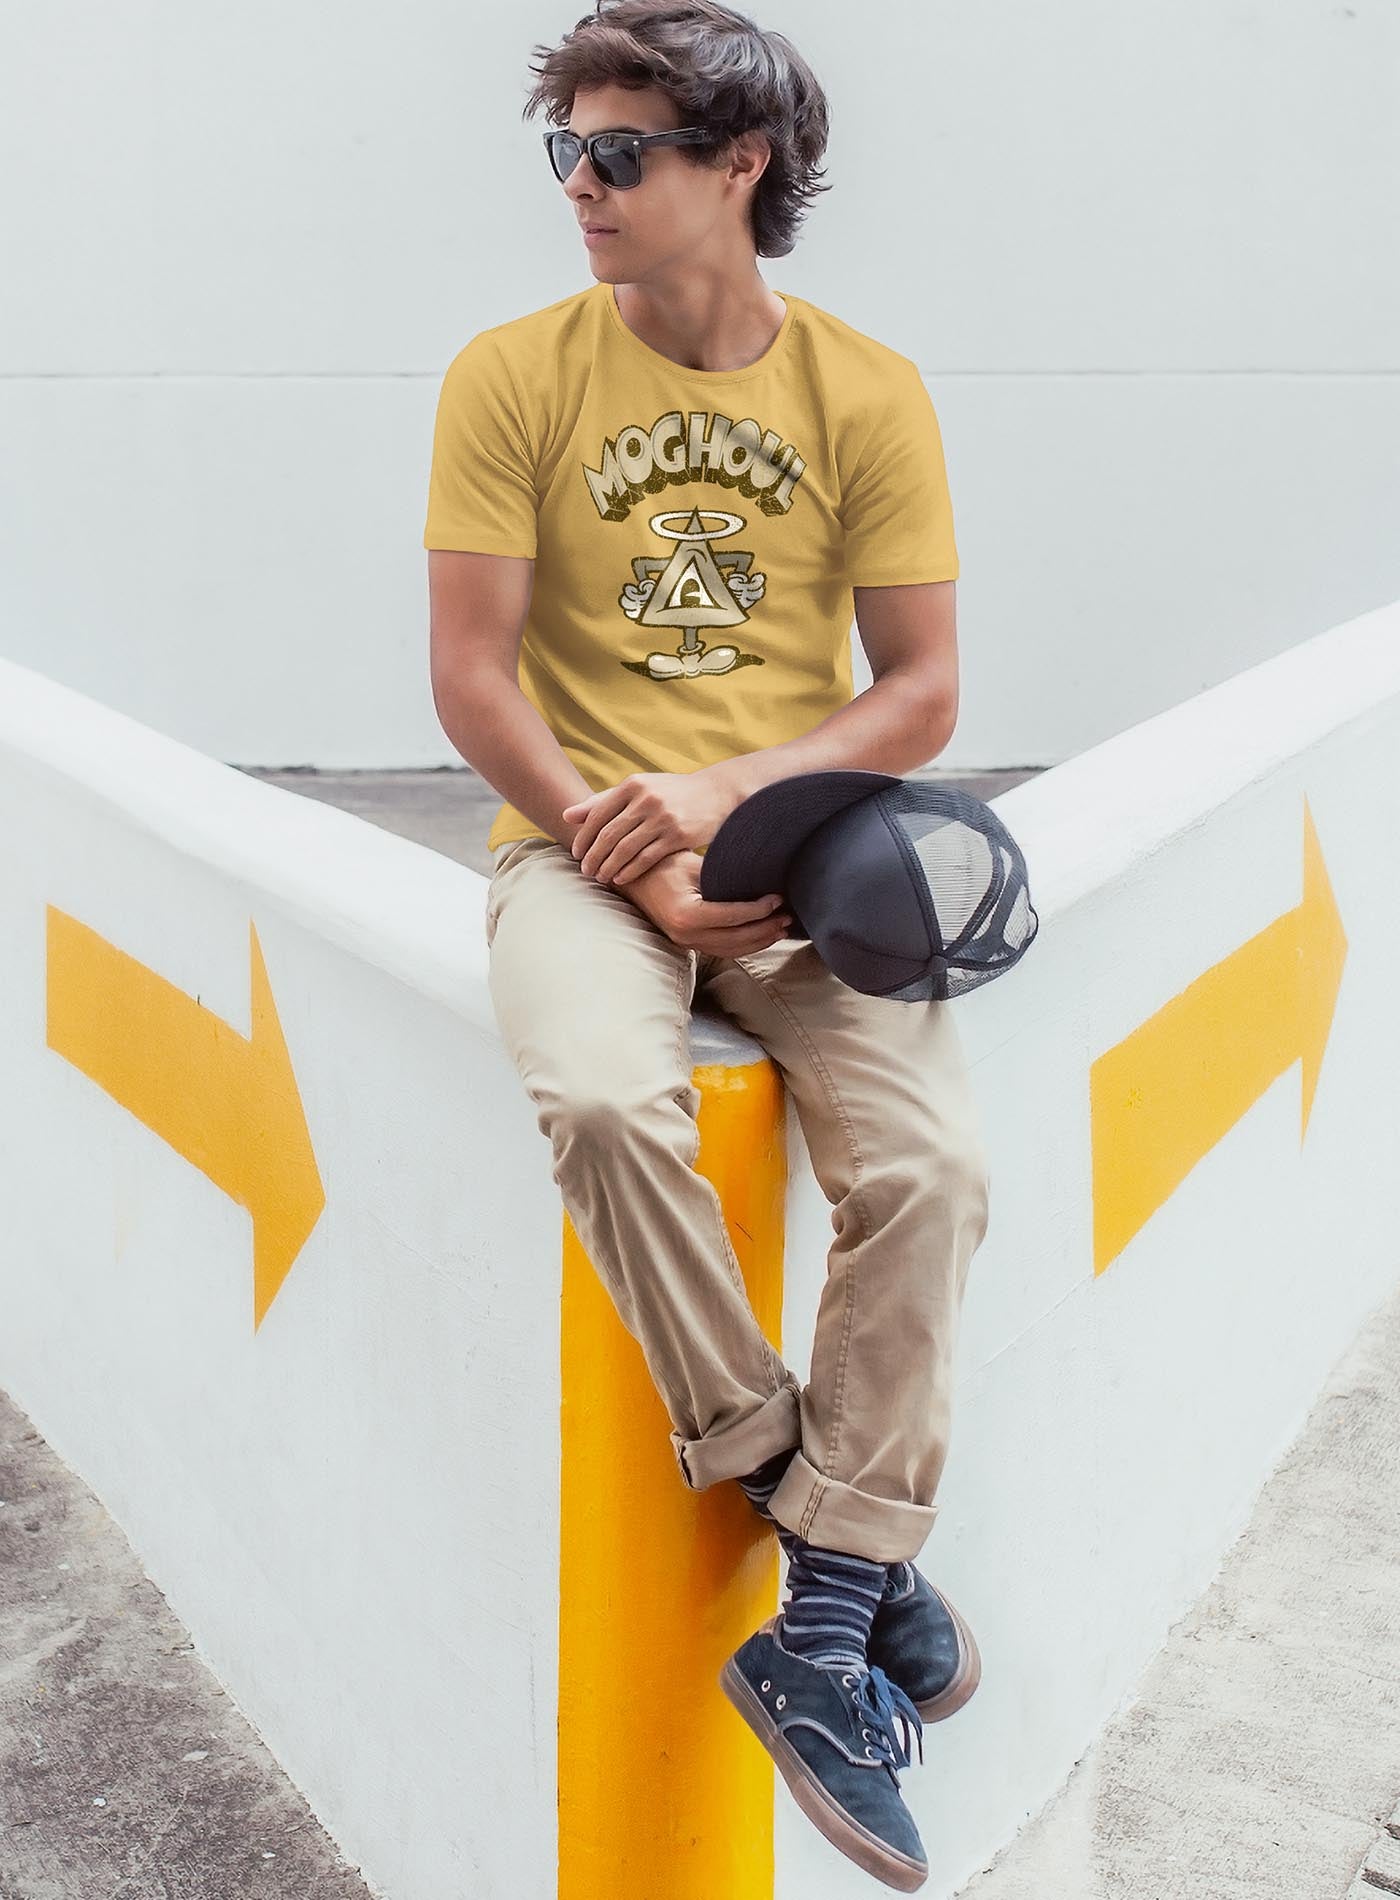 man modeling a yellow unisex t-shirt featuring a front print of a cartoon character based on the mythical Eye of Providence. By Mexican illustrator G.M. Meave.